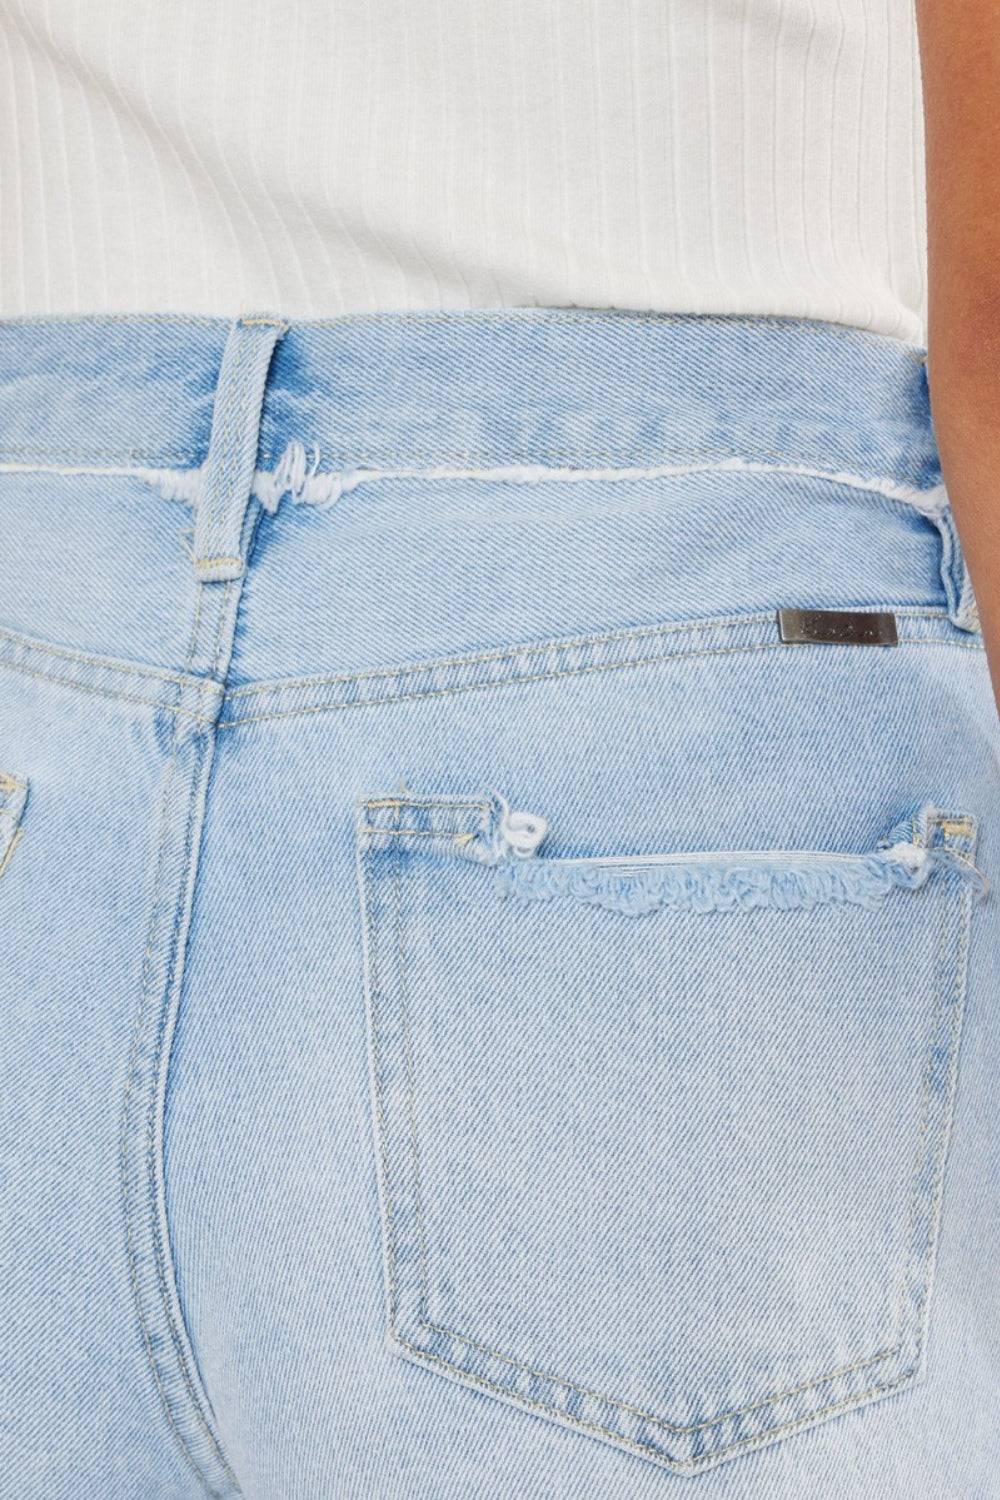 a close up of a person wearing a pair of jeans